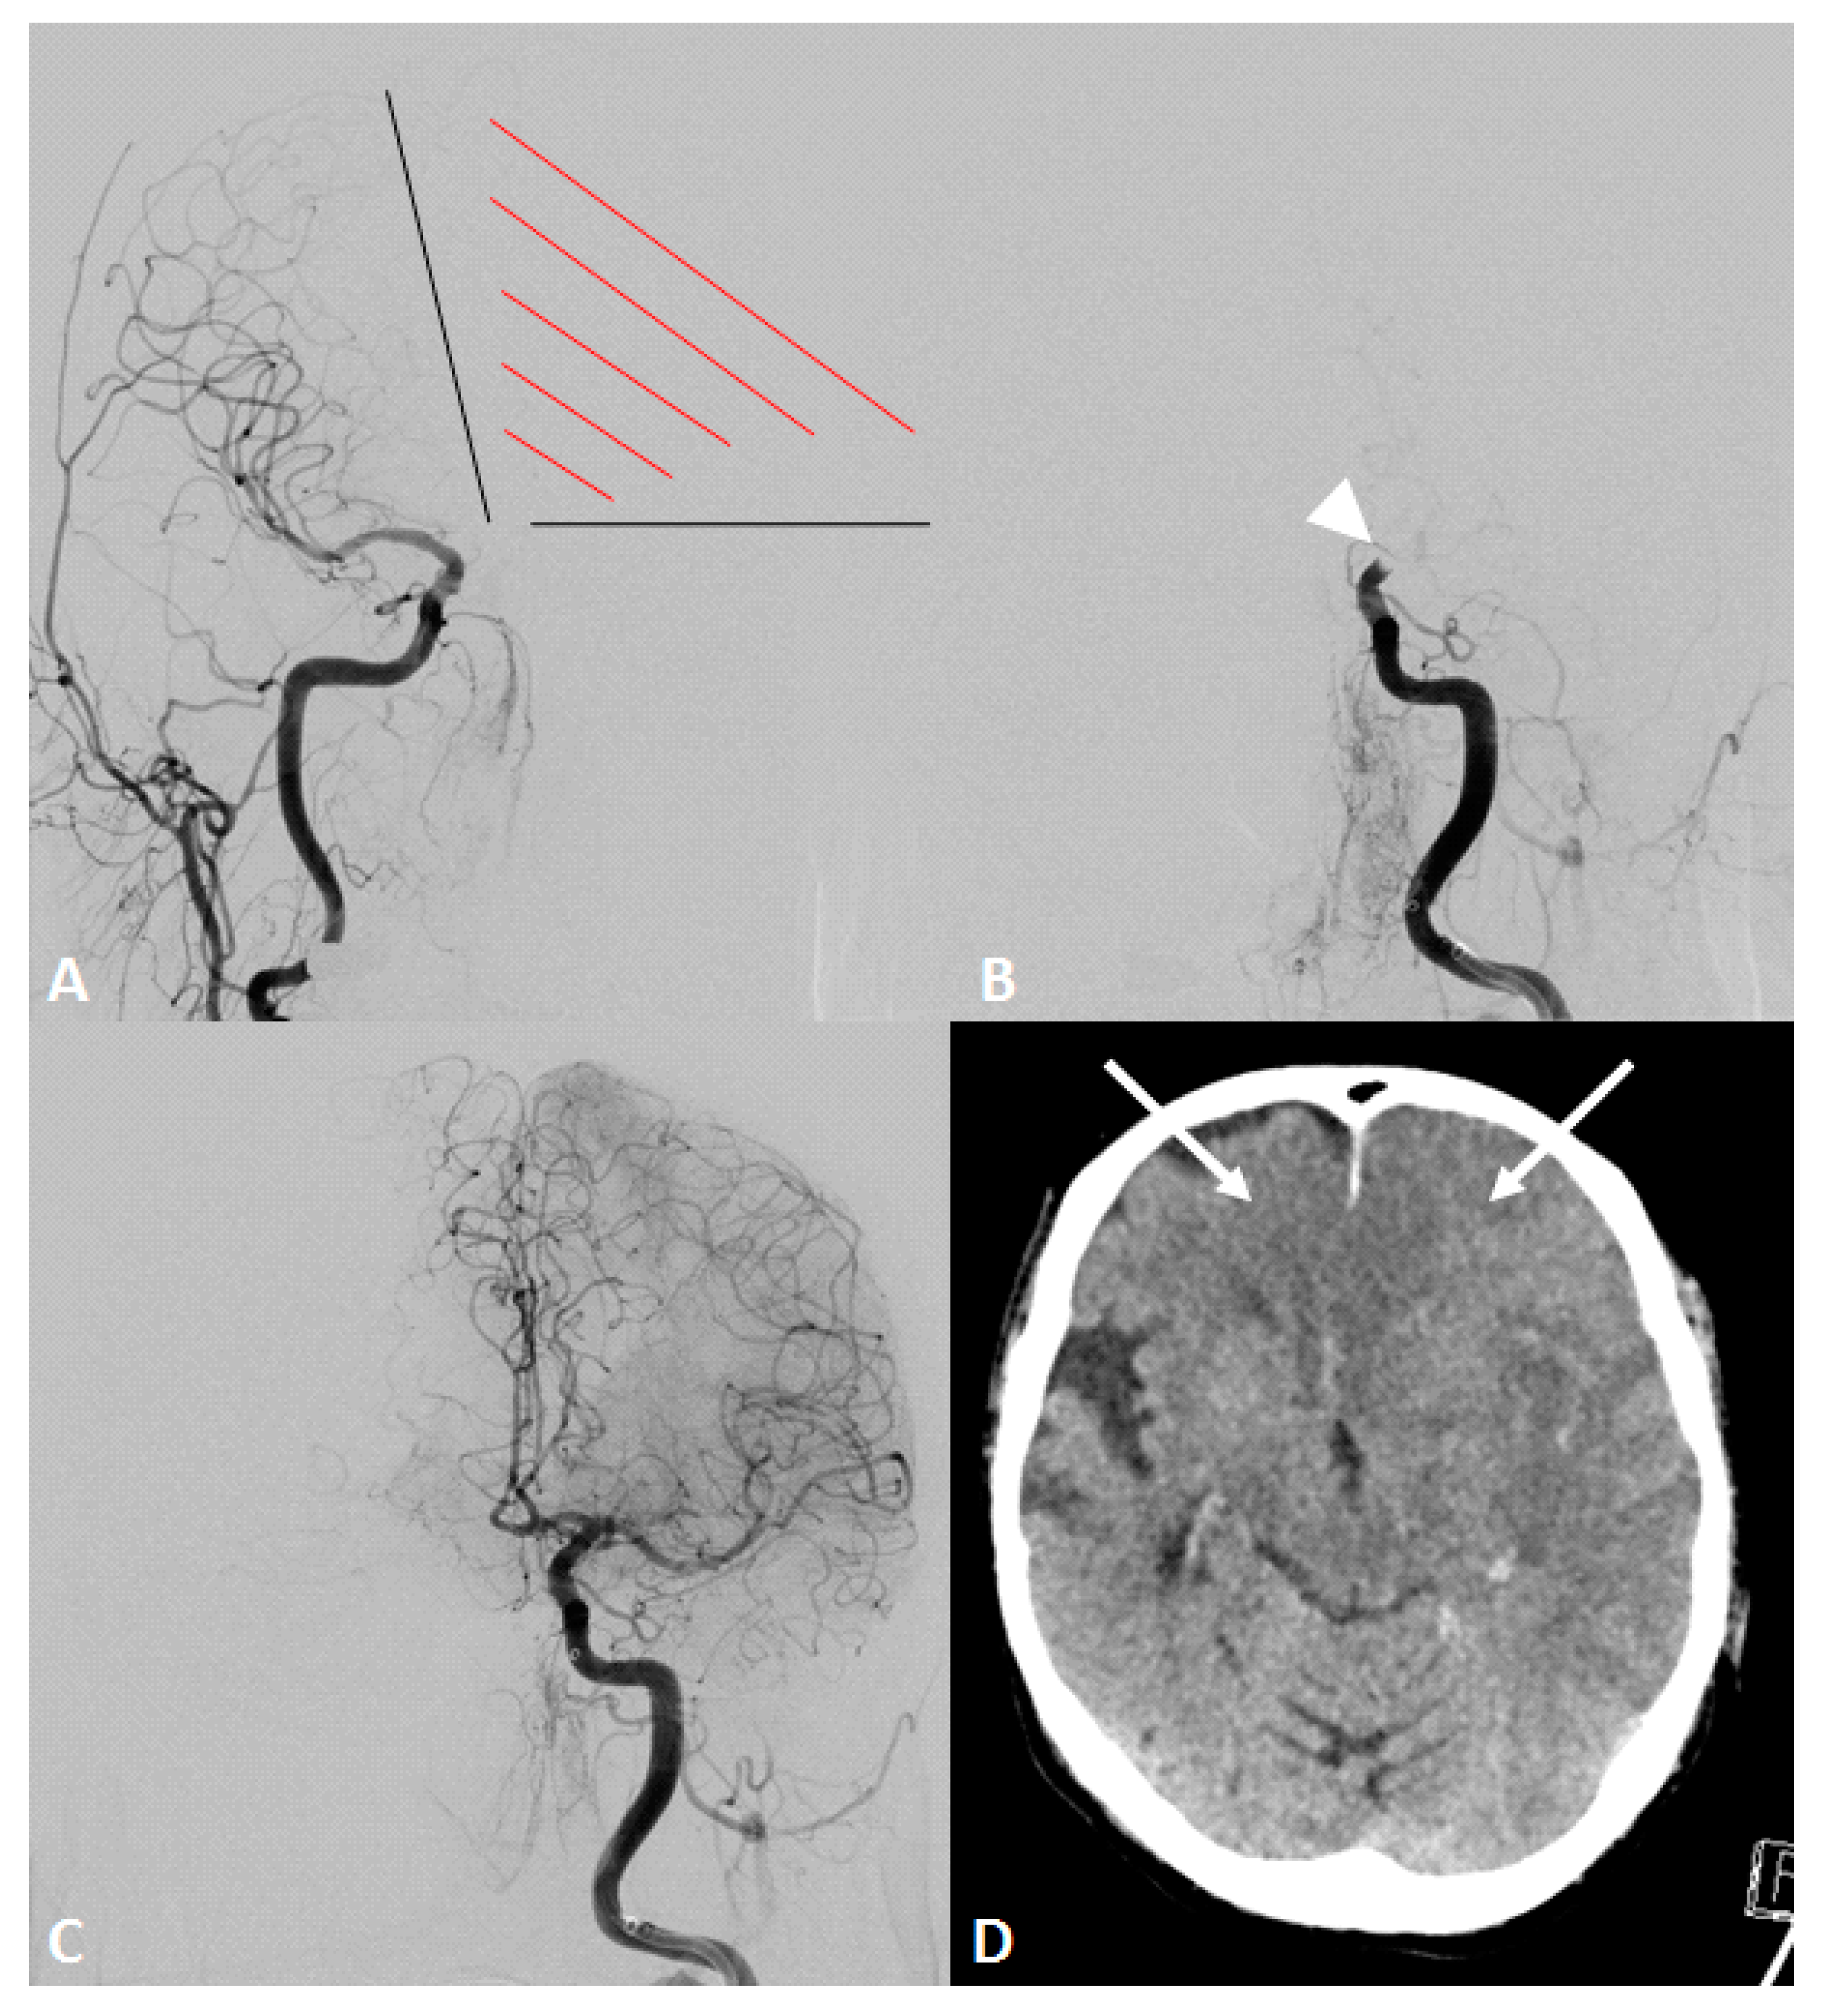 Jcm Free Full Text Functional Aplasia Of The Contralateral A1 Segment Influences Clinical